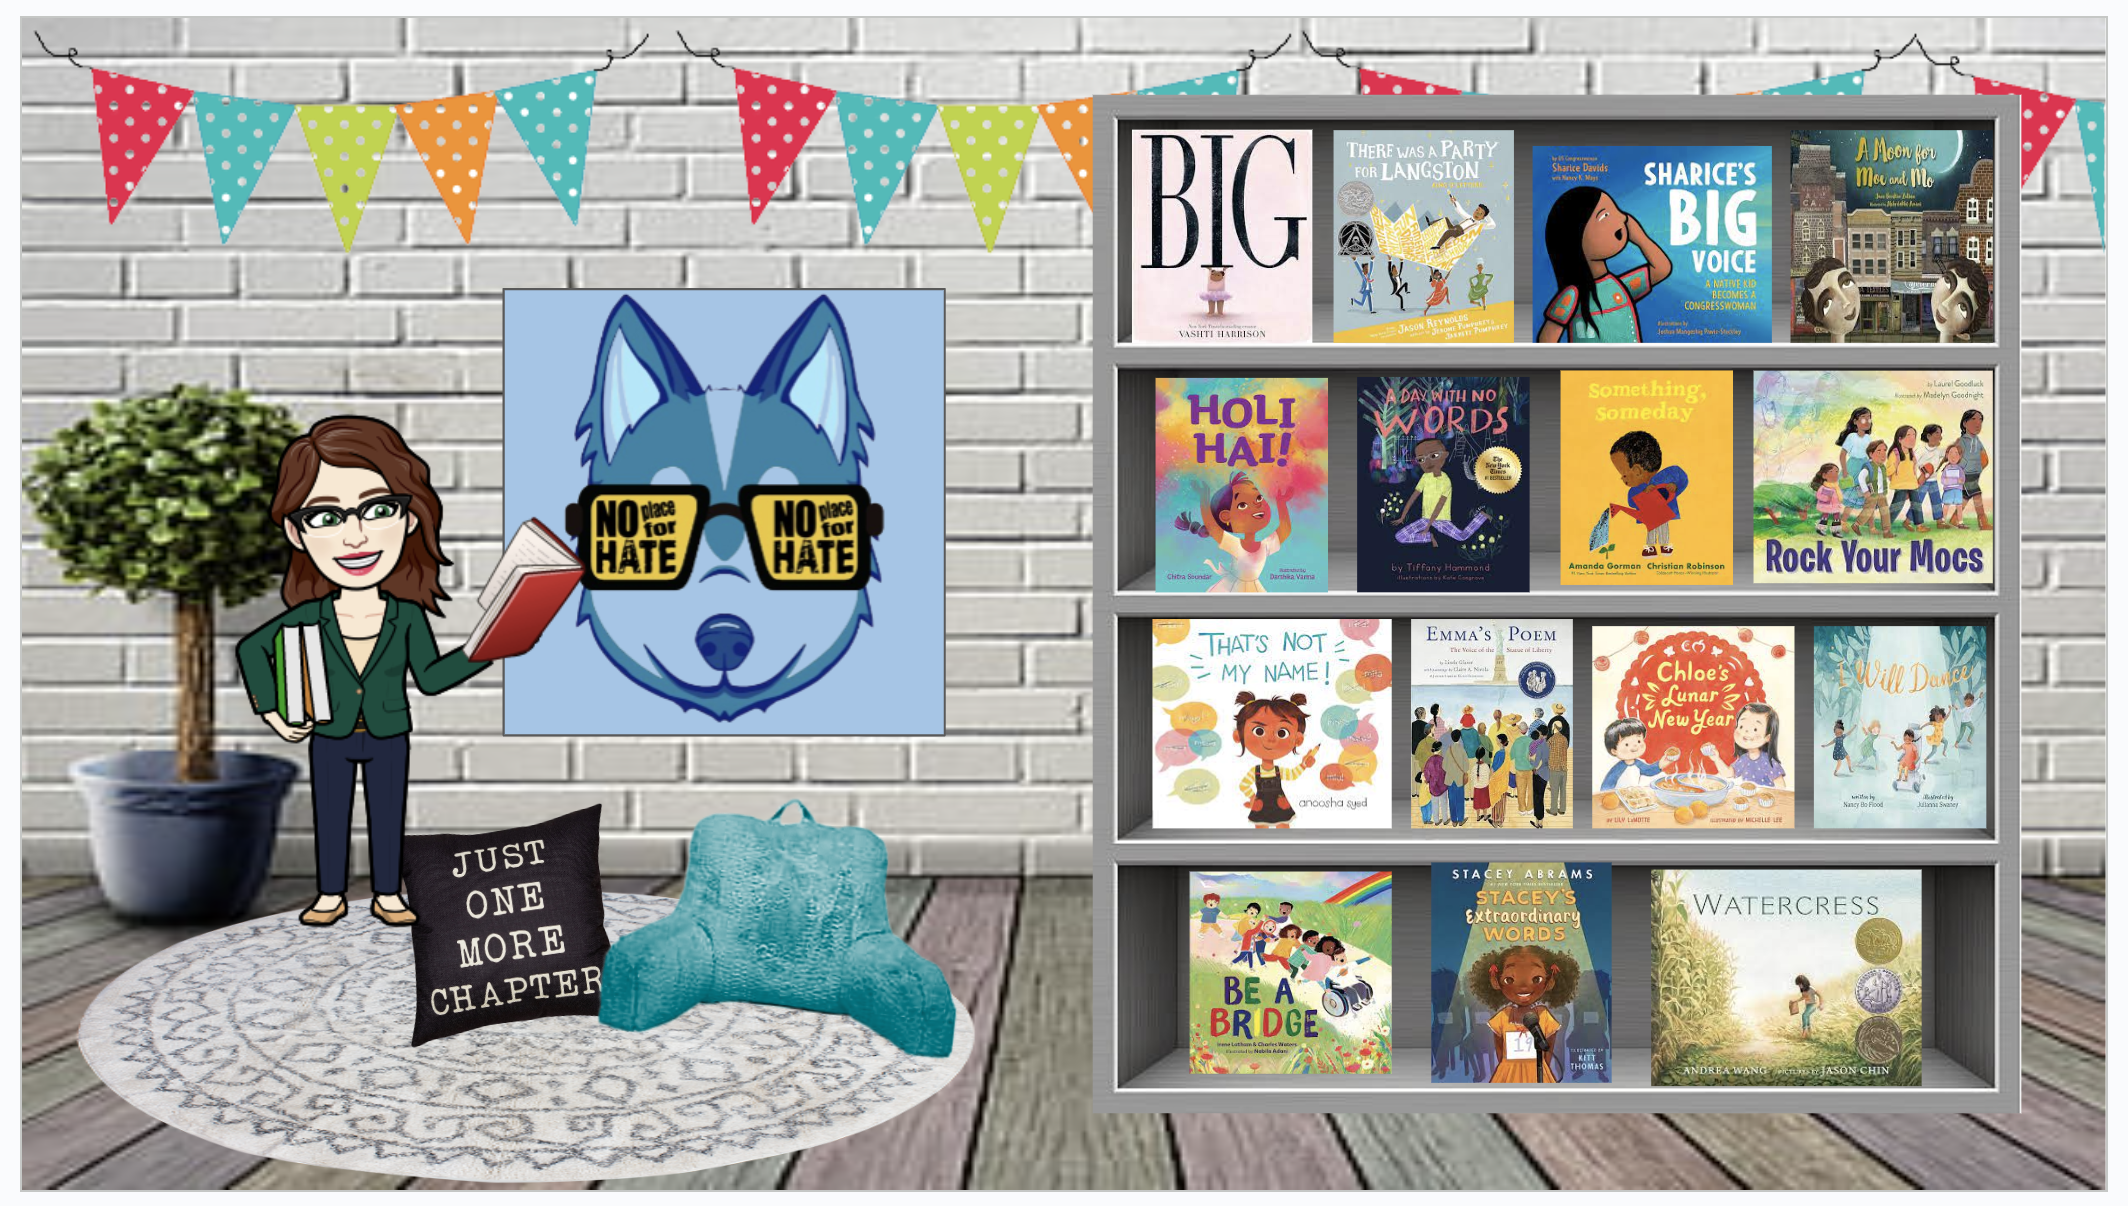 Screen shot of hte virtual library for elementary students featuring No Place for Hate recommended reading at https://docs.google.com/presentation/d/e/2PACX-1vQp2YIS1iUxFs_Je6hYeLYXvxzizWcZY5dLNkuypqCHYpgSGOyxcitpJTiq9j61hq94JIXX_E2b34CD/pub?start=false&loop=true&delayms=60000